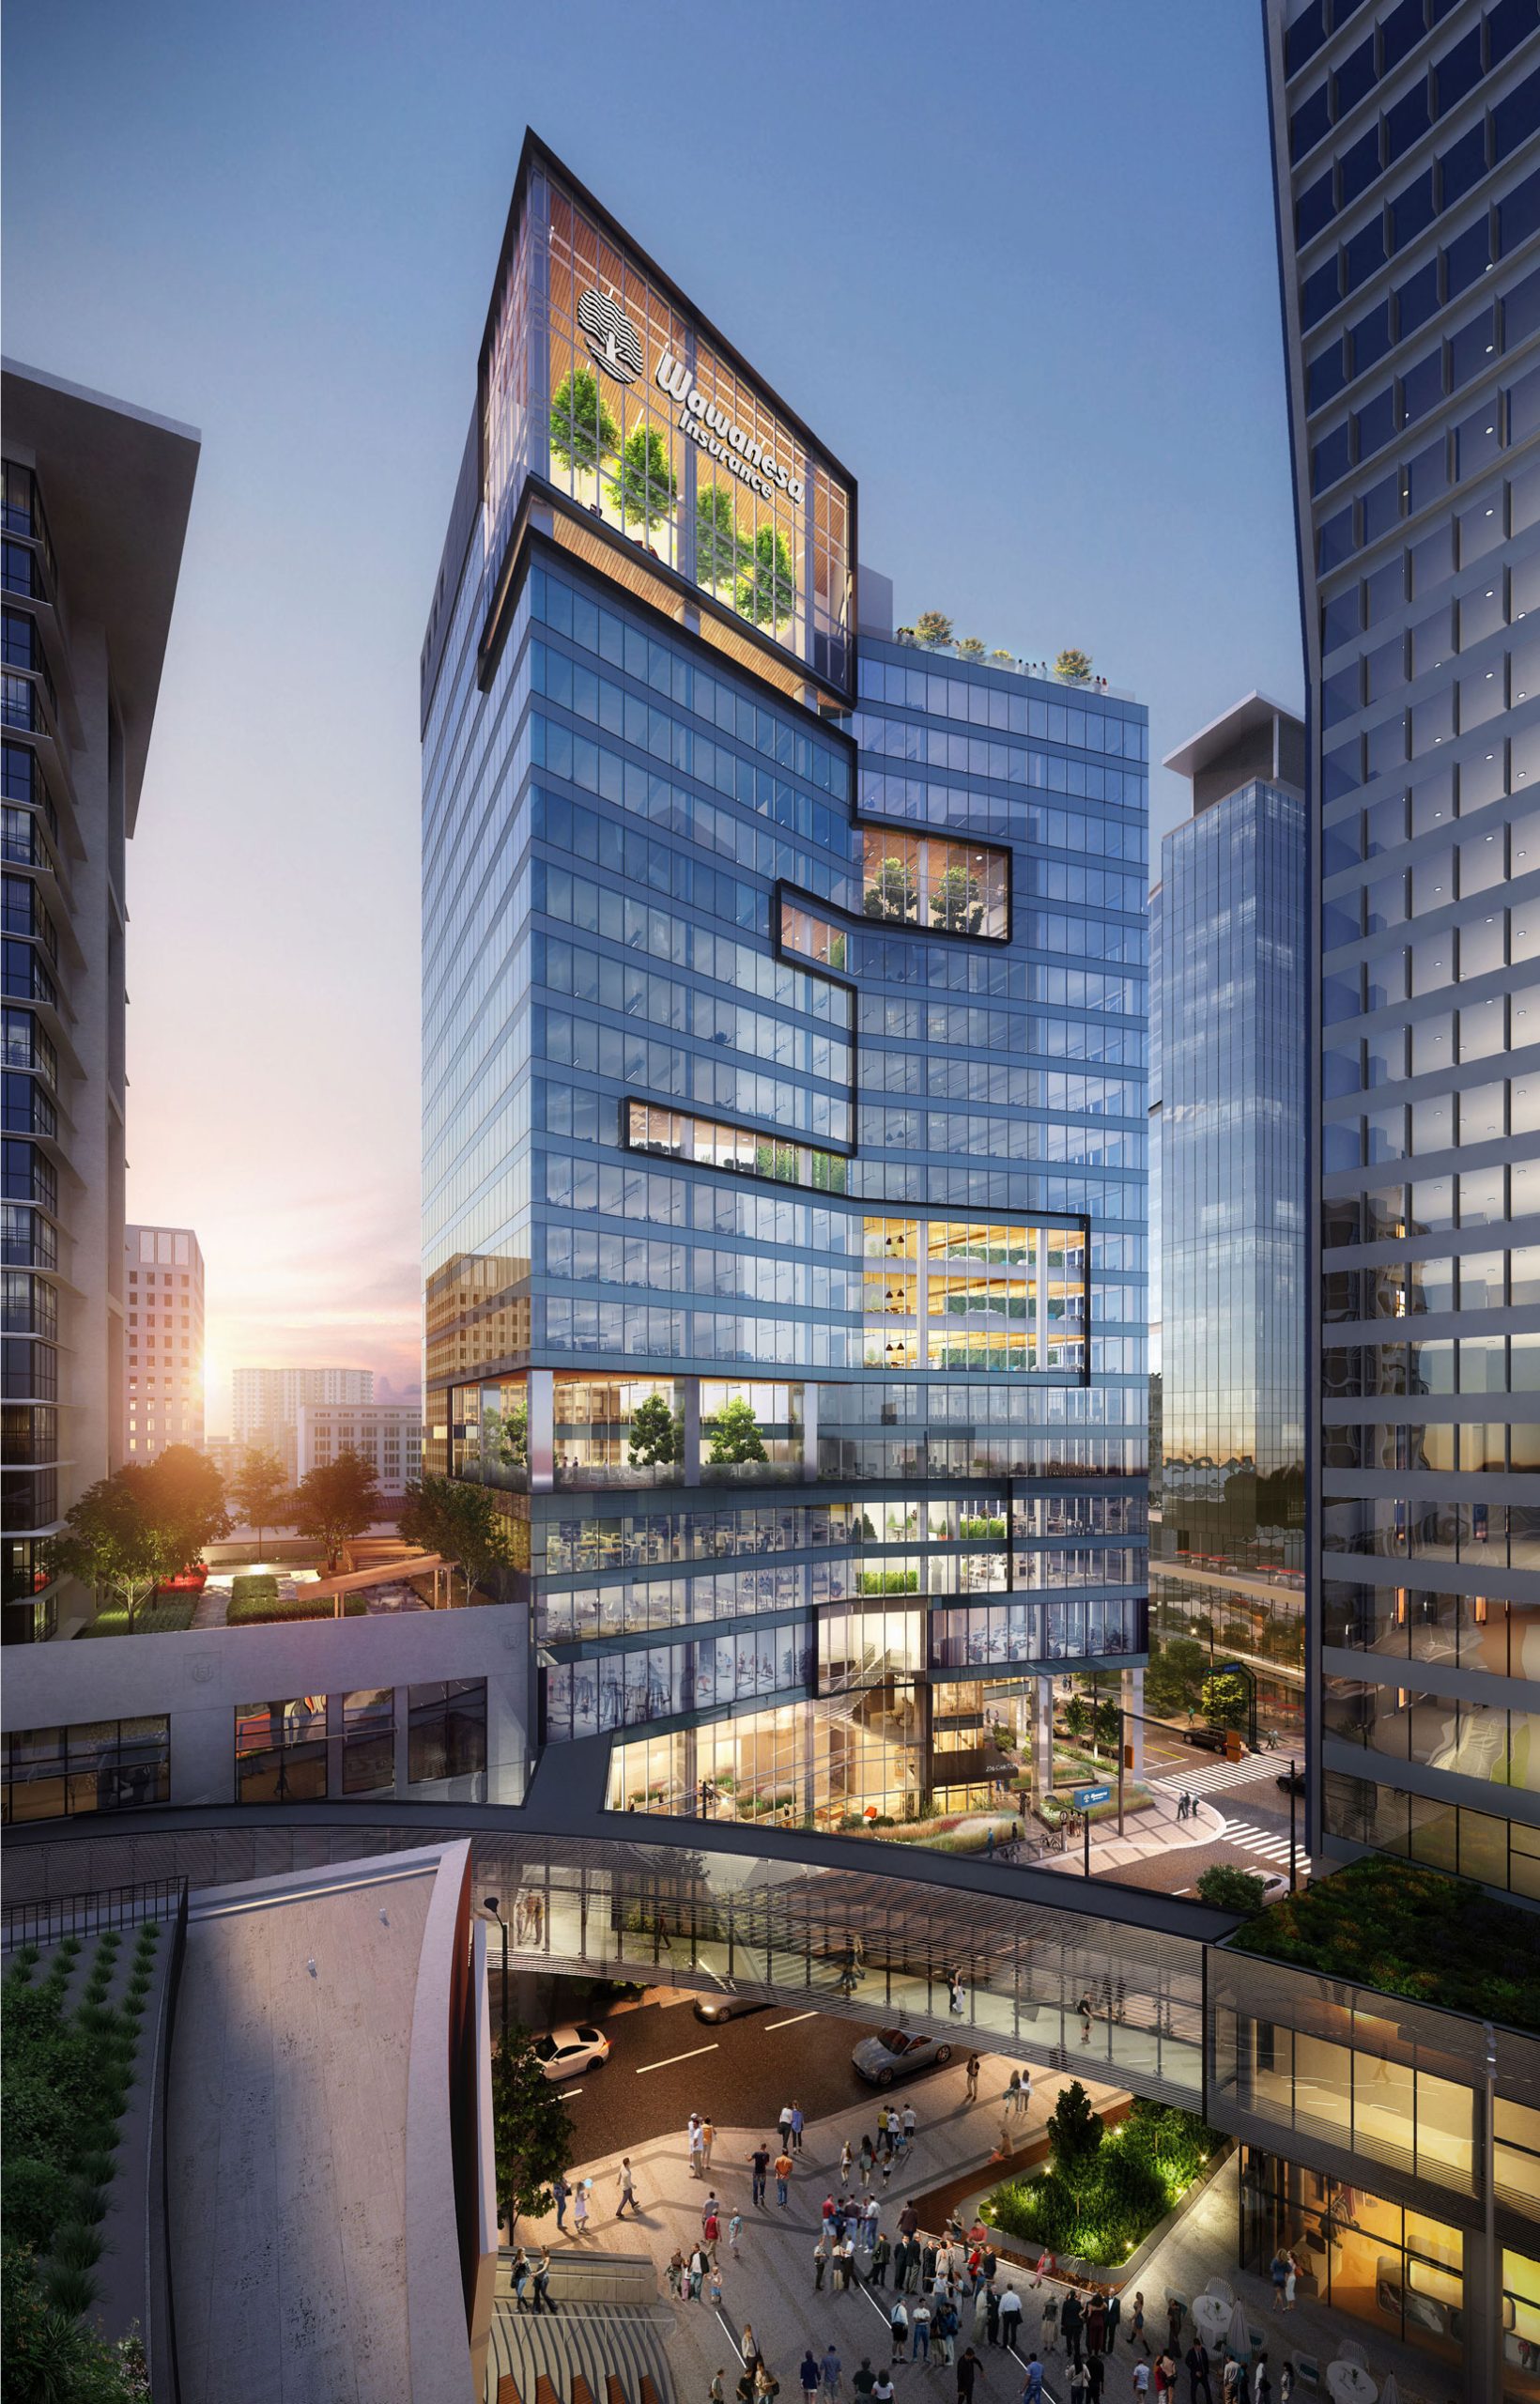 Wawanesa Mutual Insurance Company’s new building in downtown Winnipeg, Manitoba, will unite a company and create opportunity in the city’s downtown core.